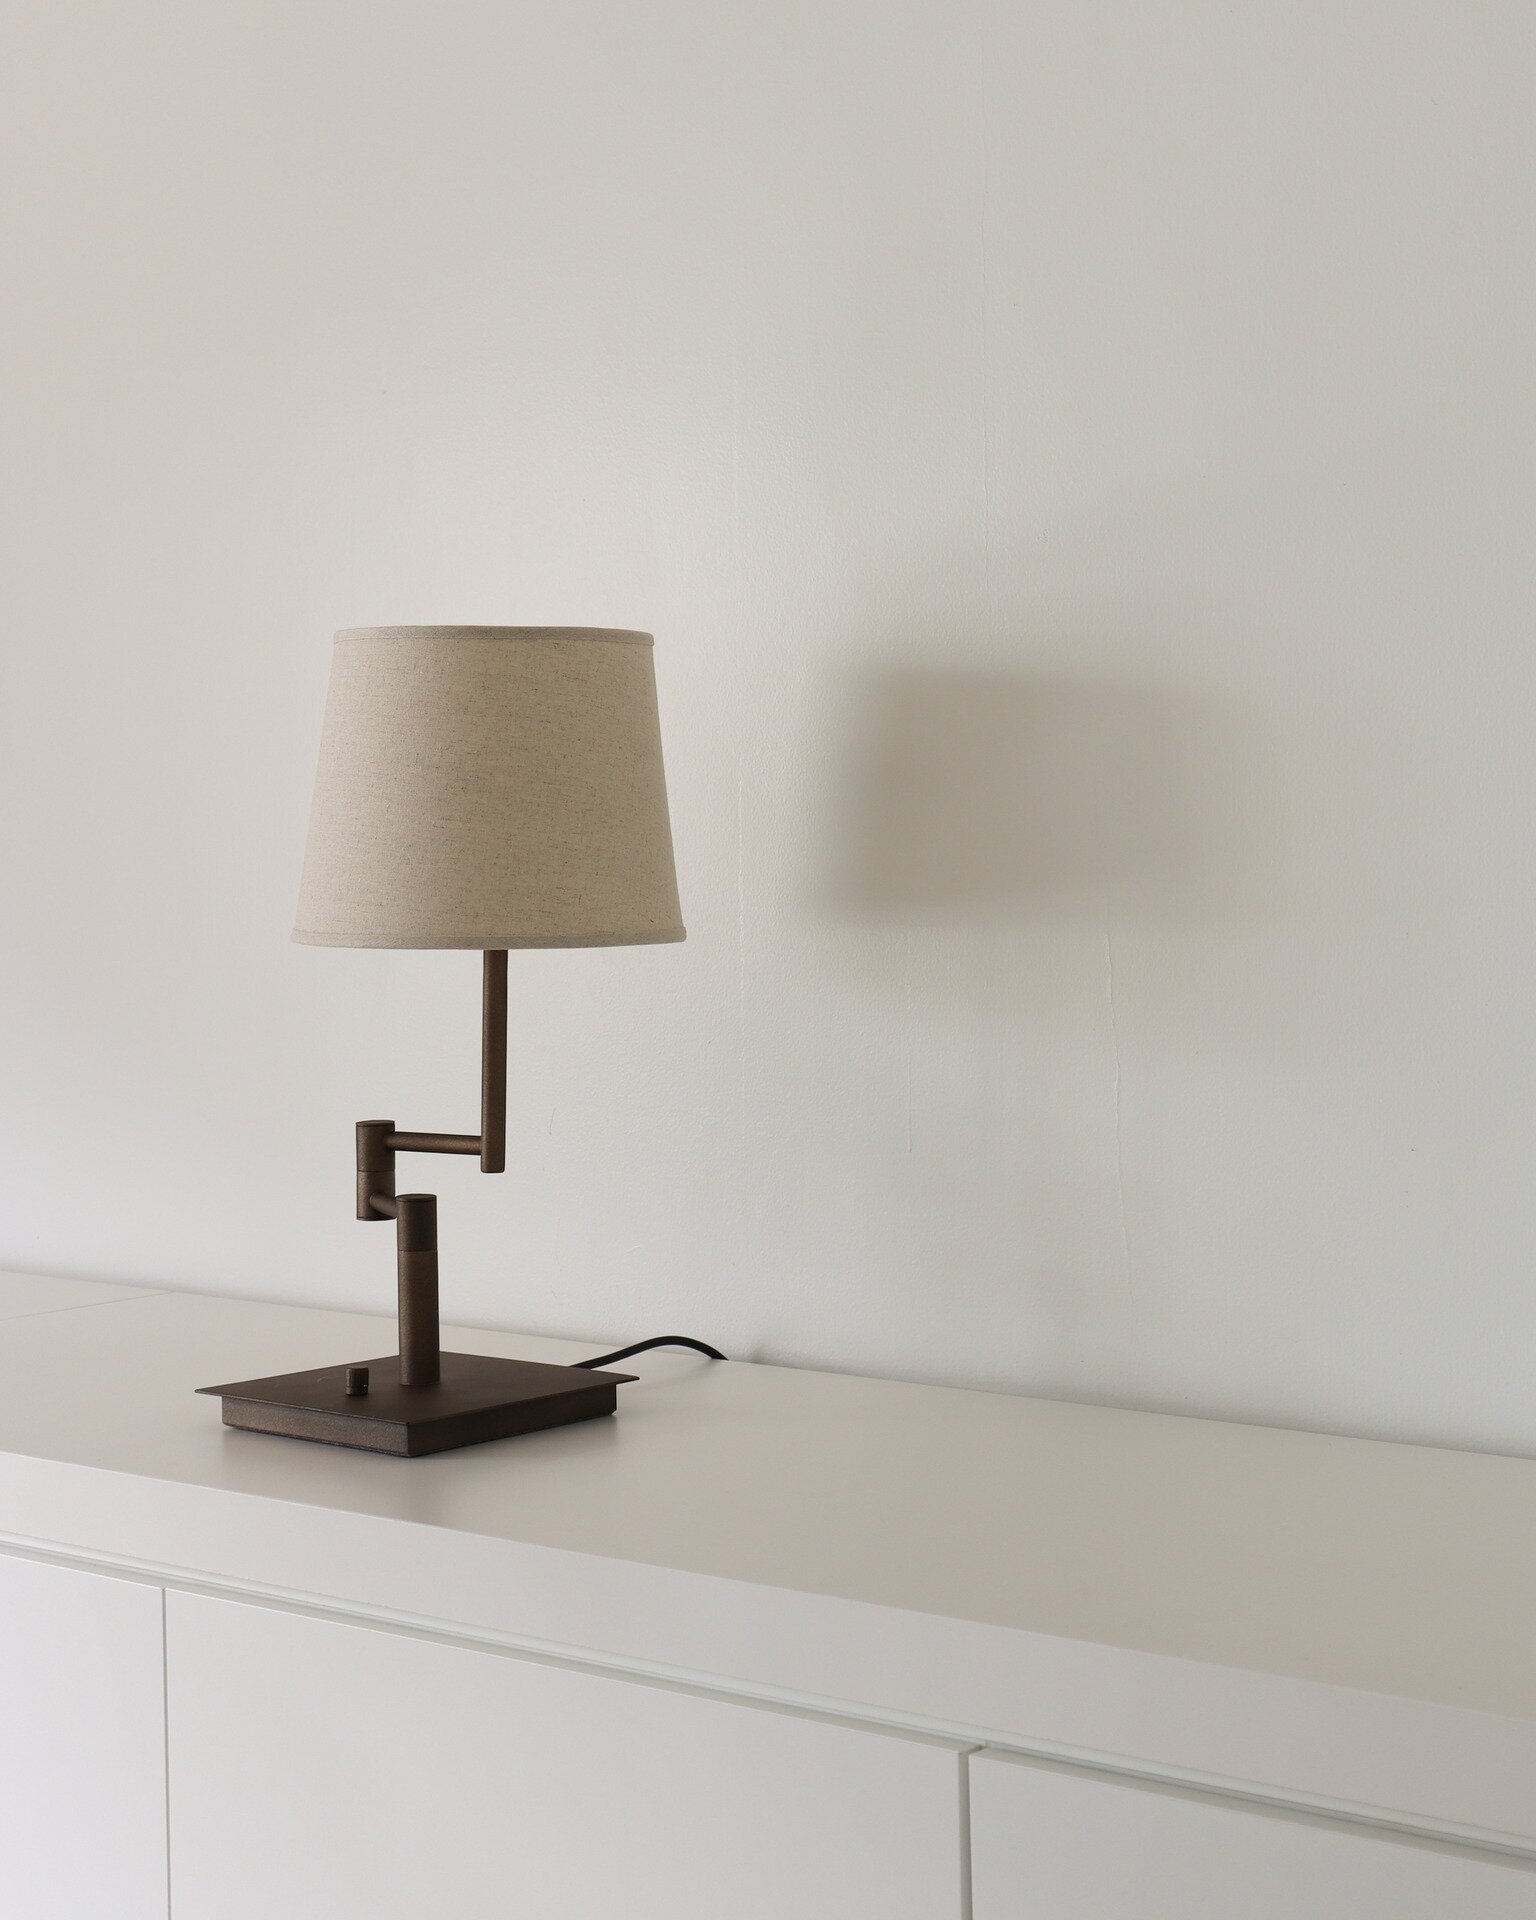 Brooklyn lamp boasts a sleek and slender profile, adding a touch of contemporary finesse to your home.

Explore more via sepia-living.com